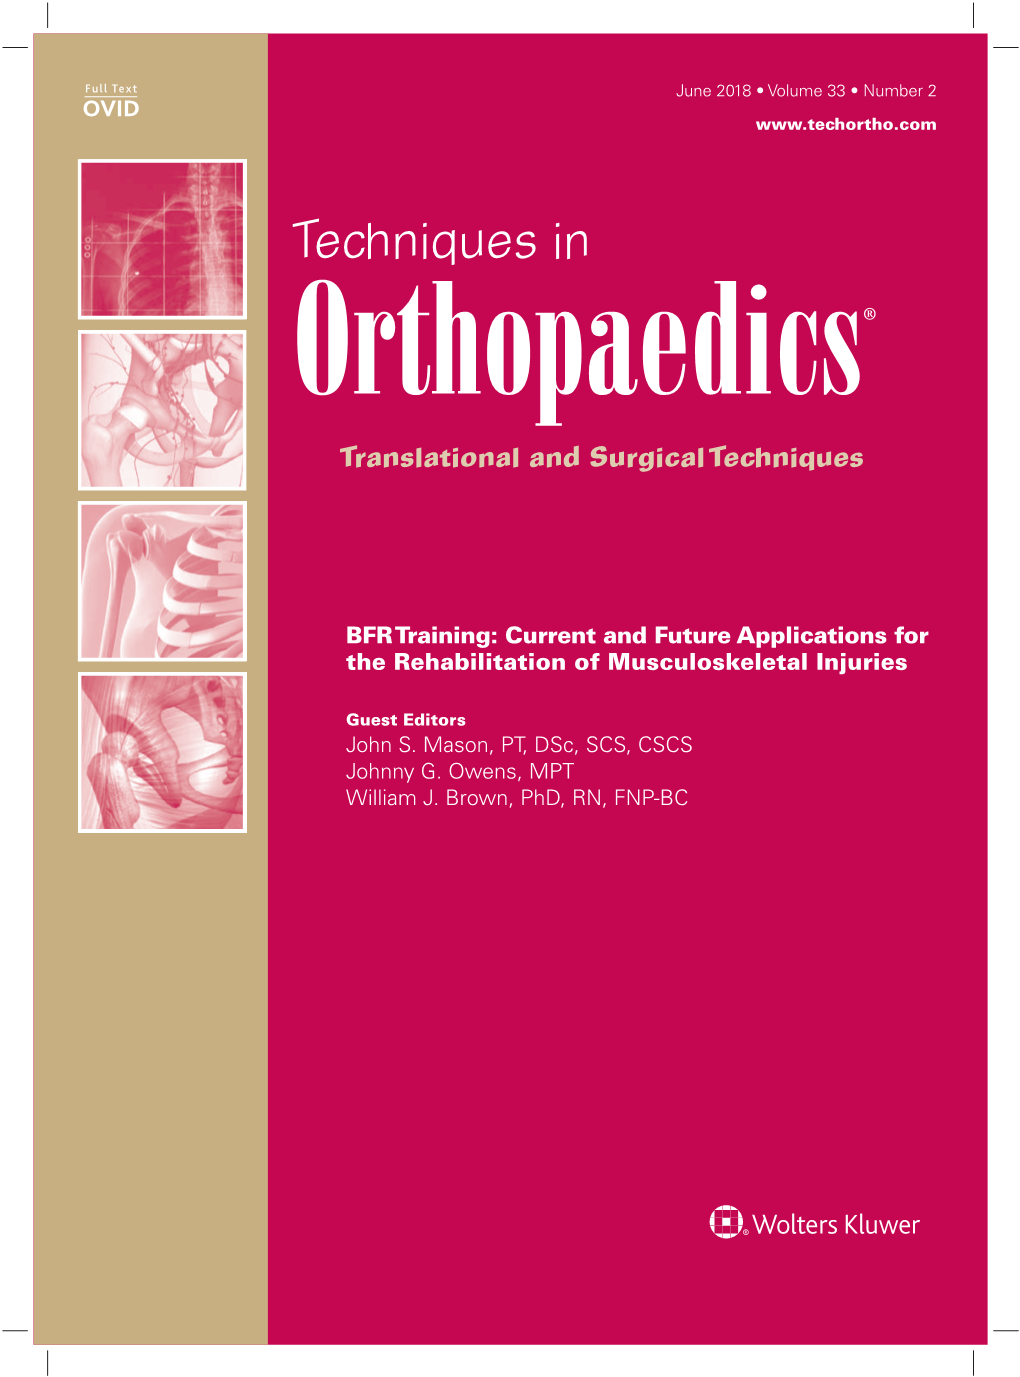 Techniques in Orthopaedics® Translational and Surgical Techniques